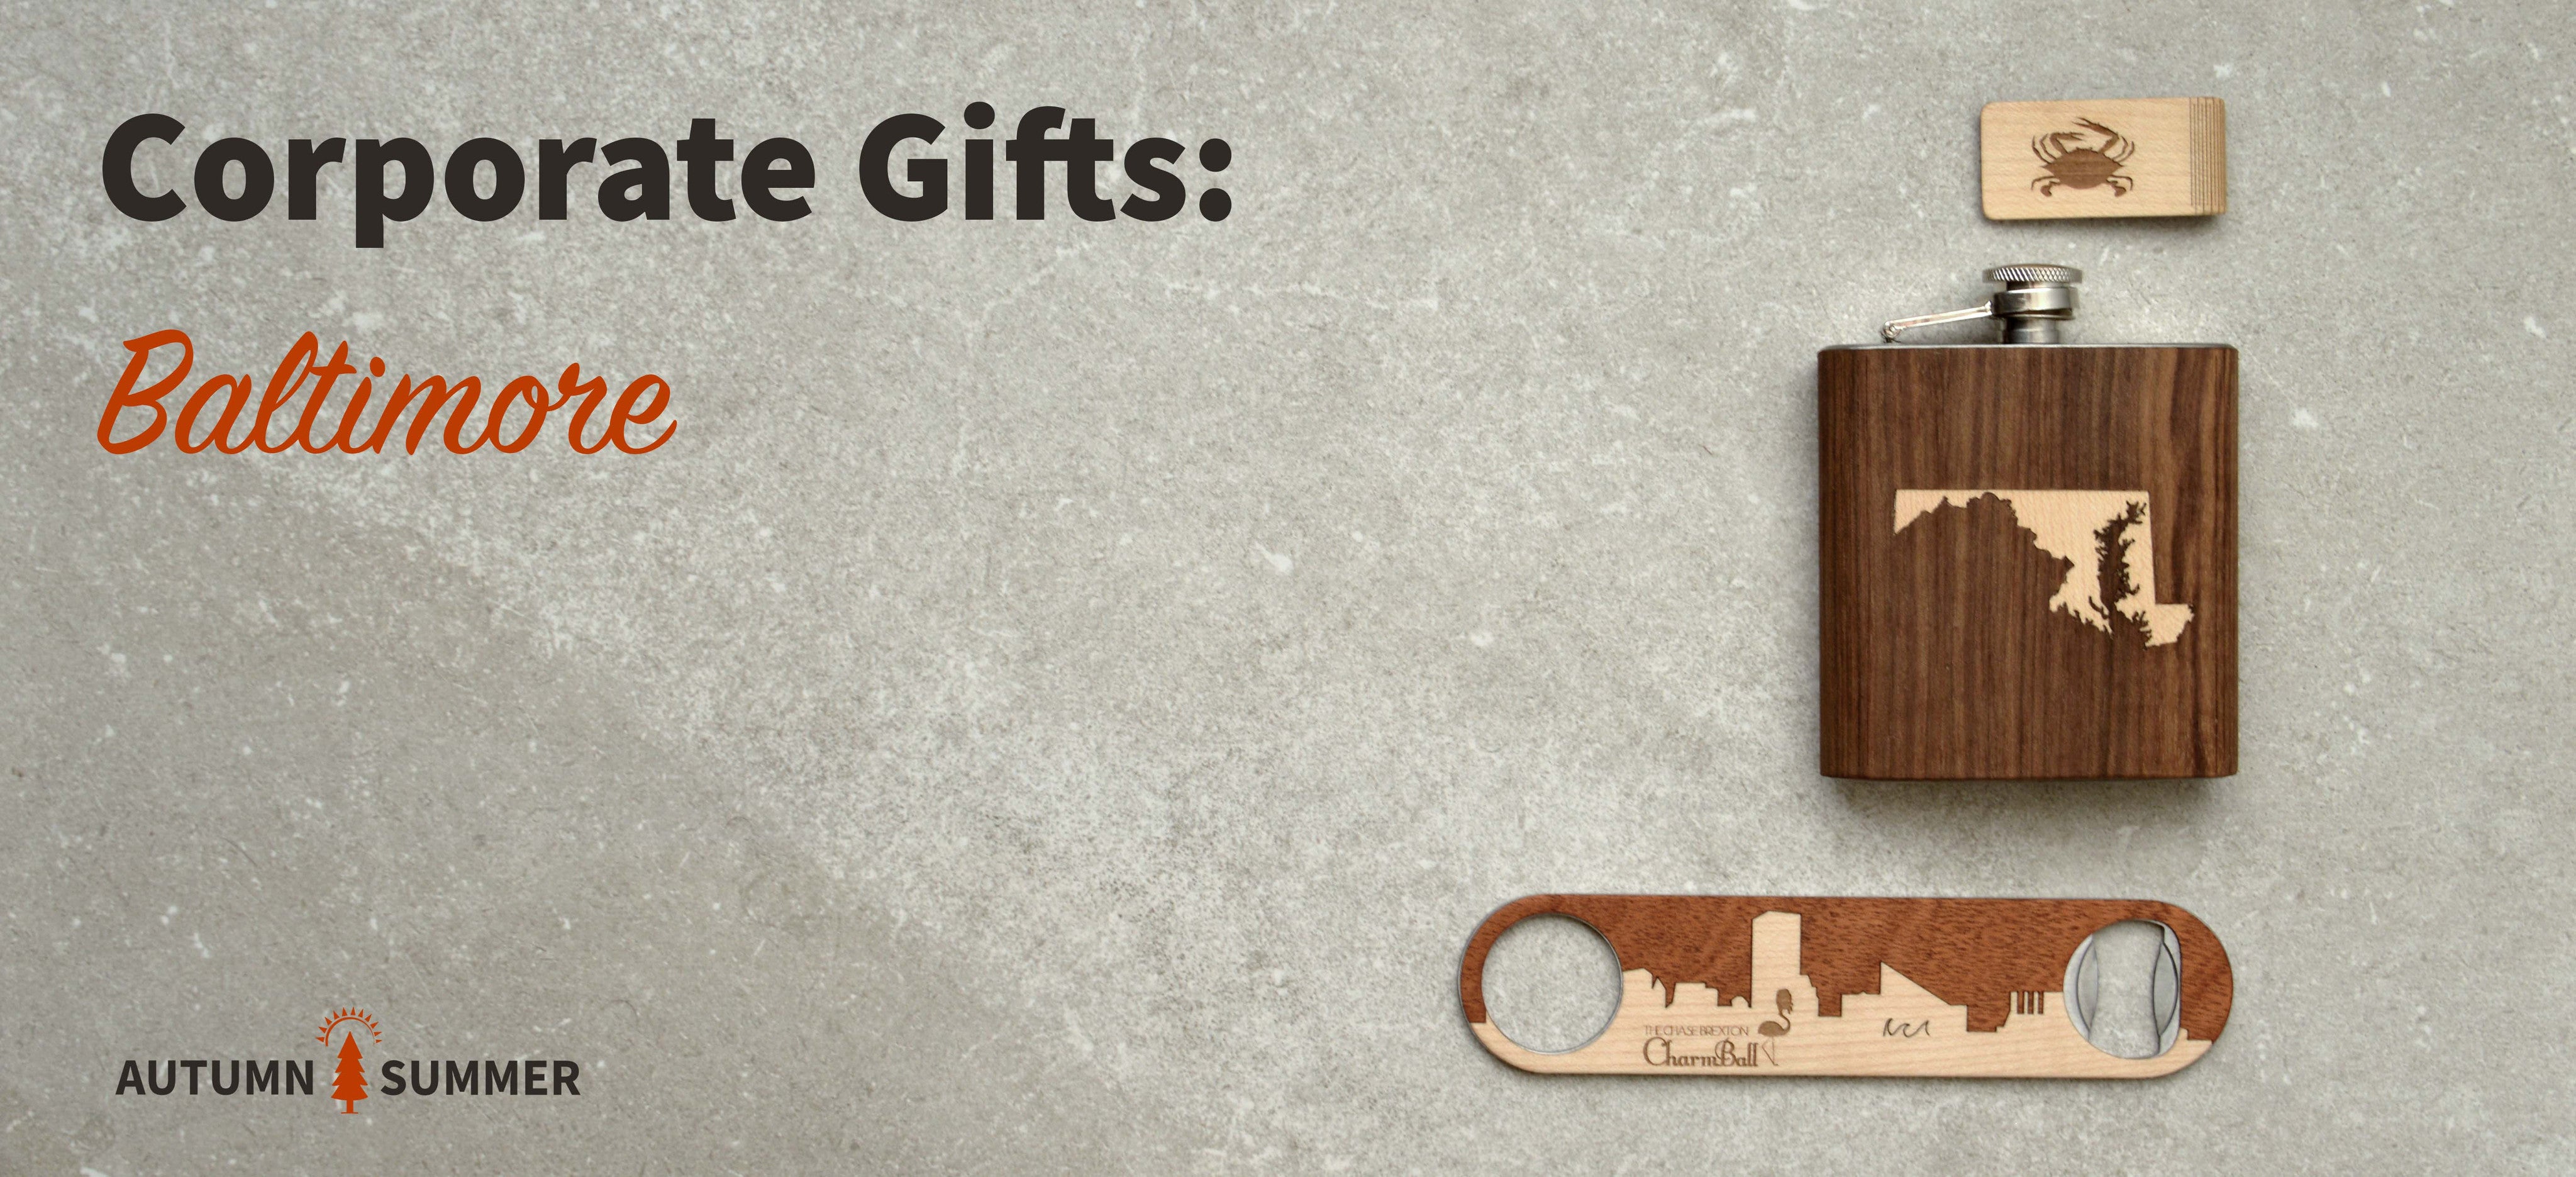 Baltimore Corporate Gifts